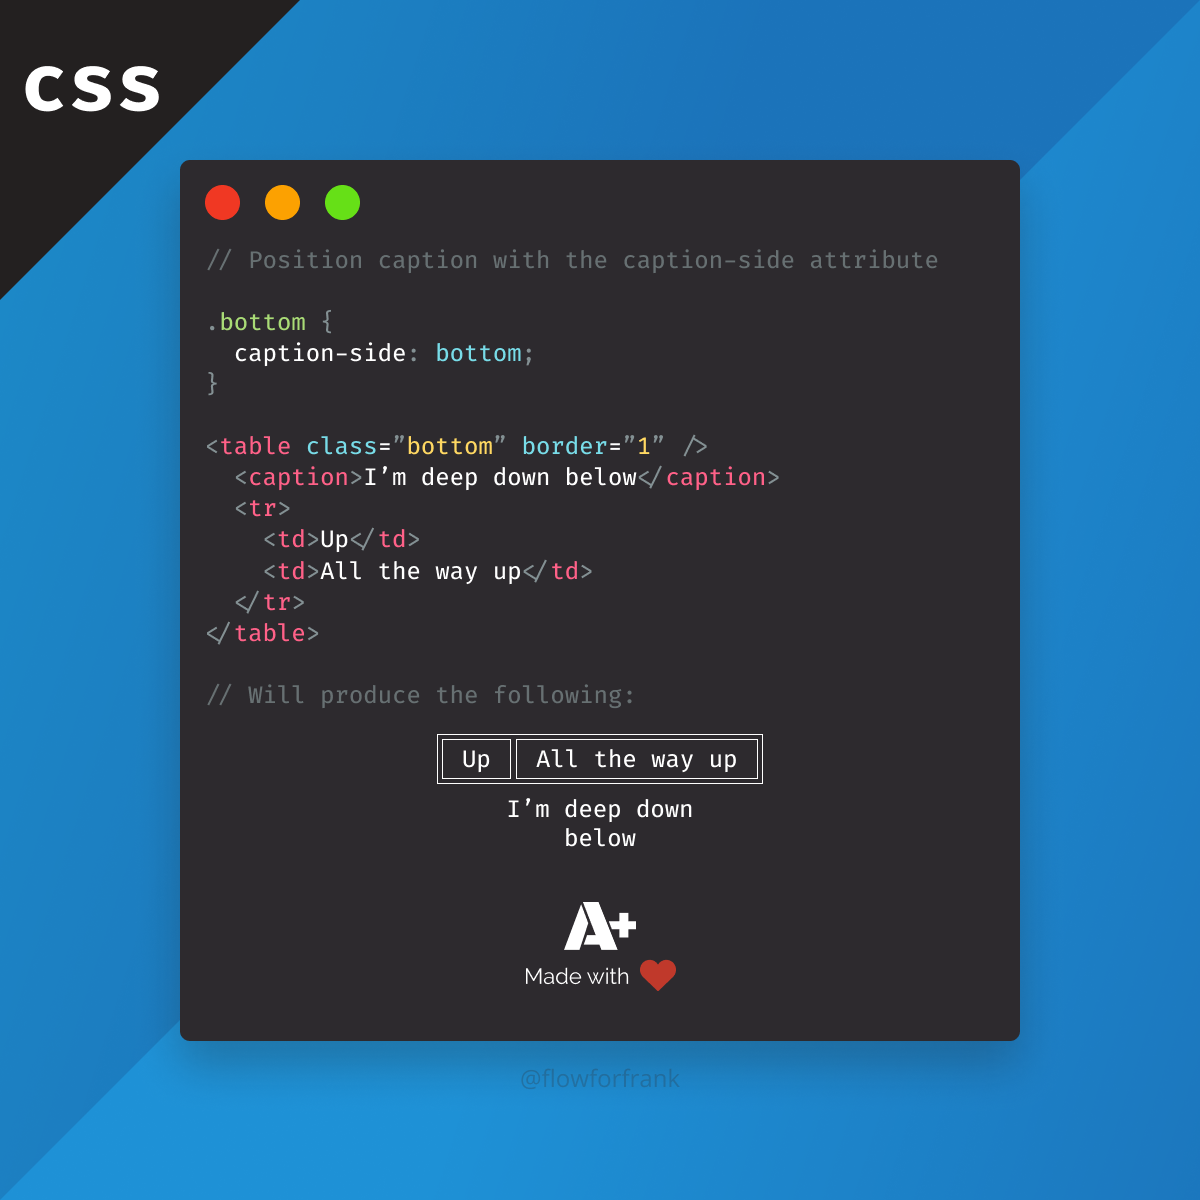 How to Position Caption for Tables in CSS